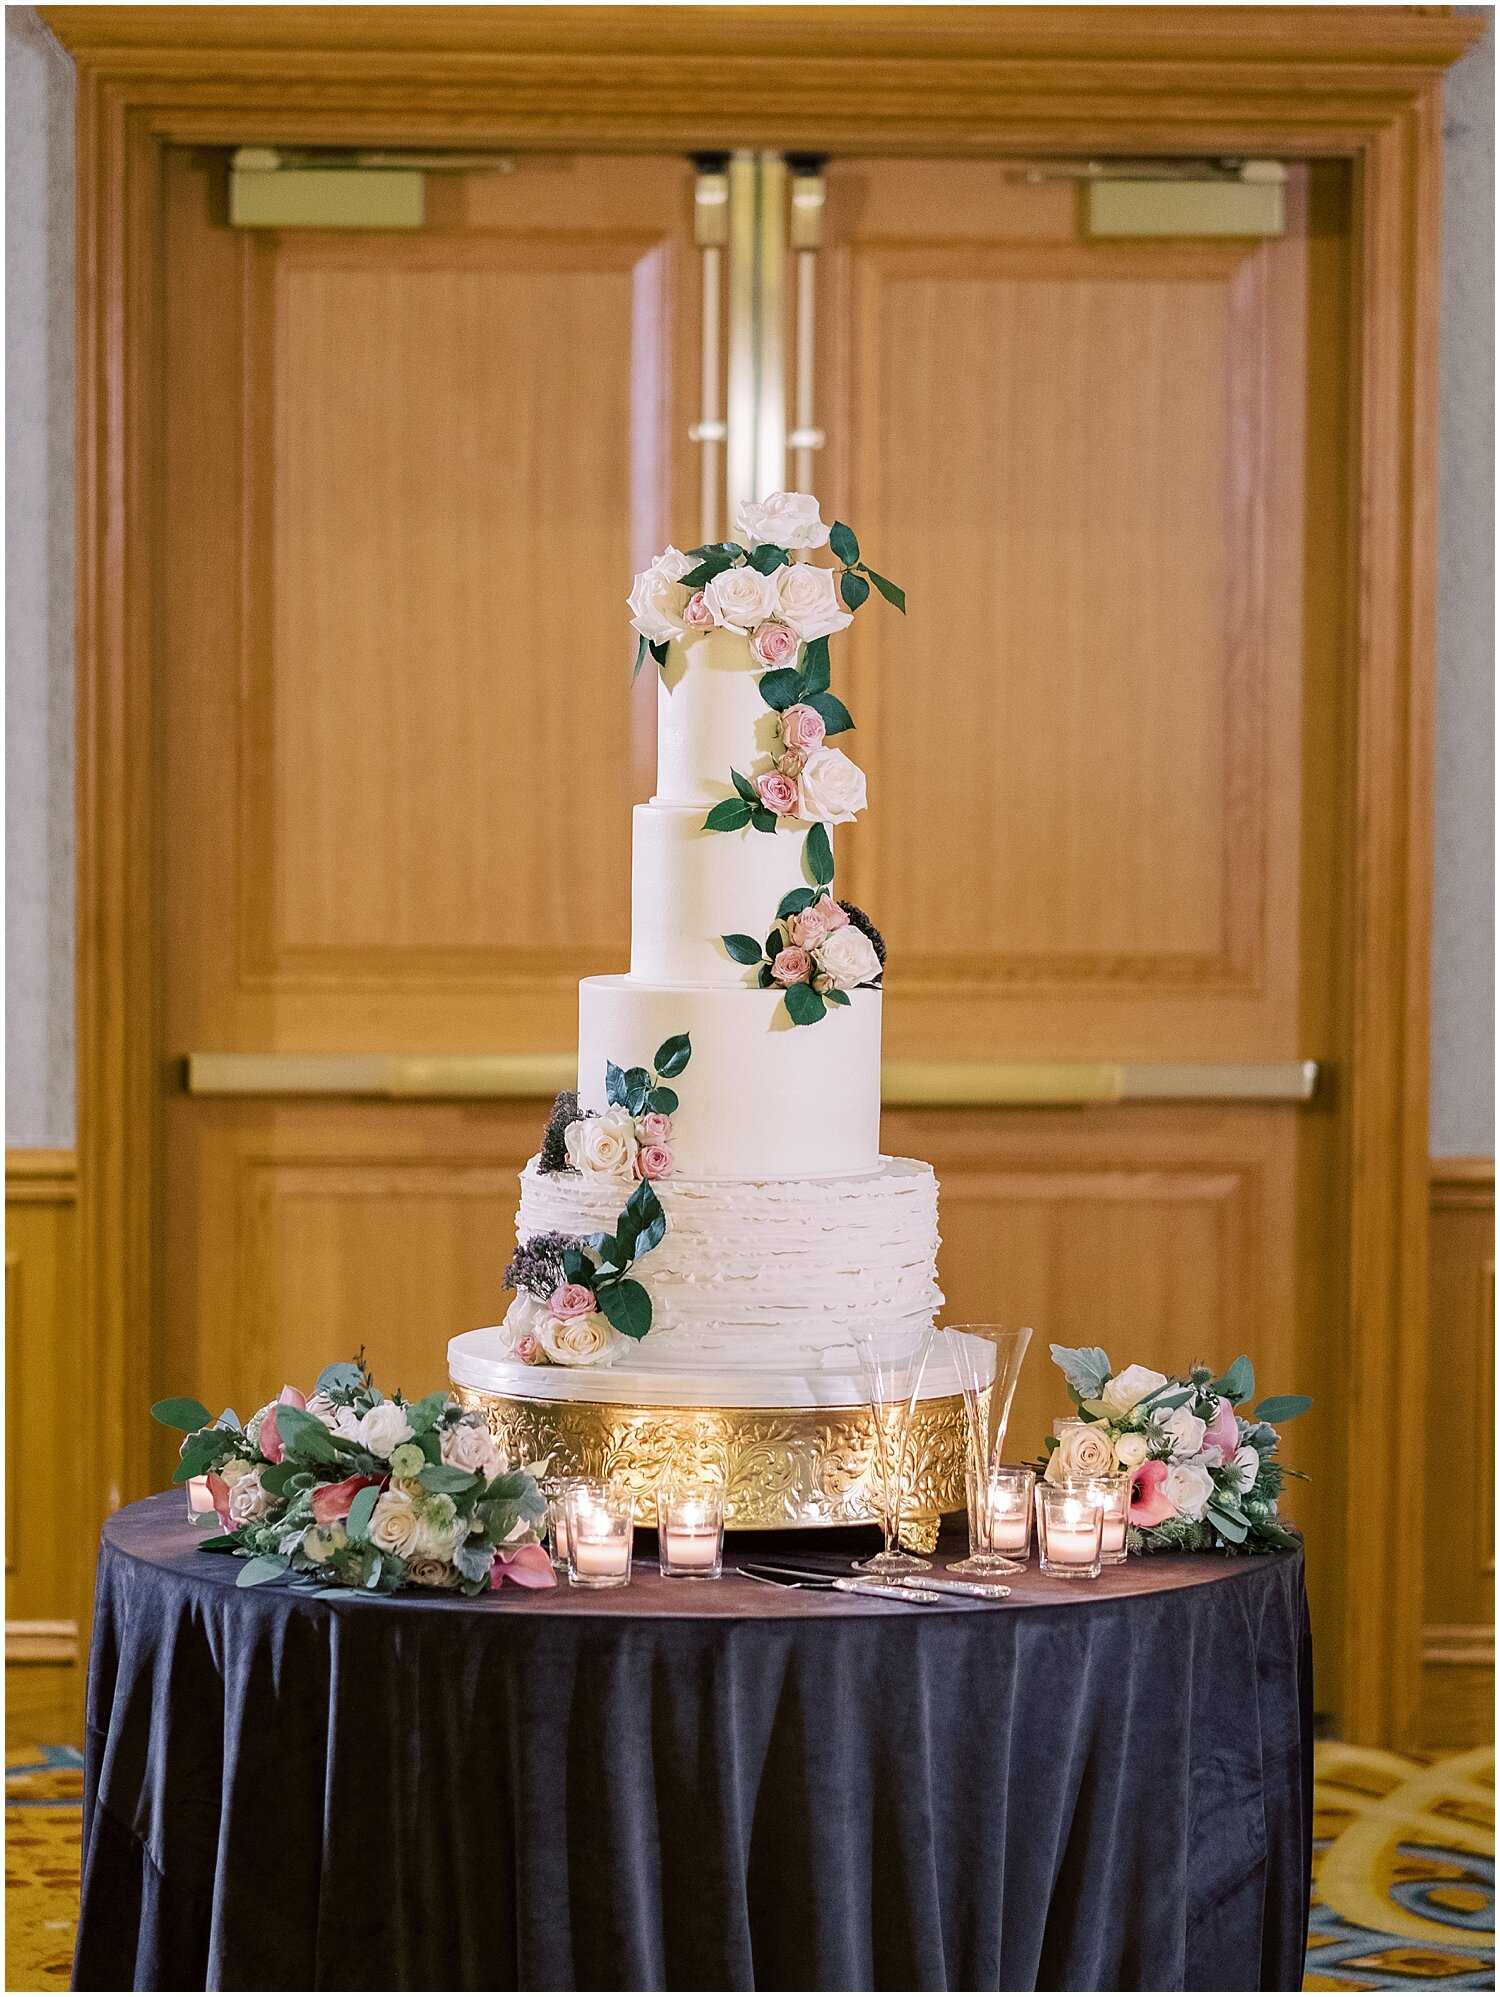  wedding cake with floral decor 